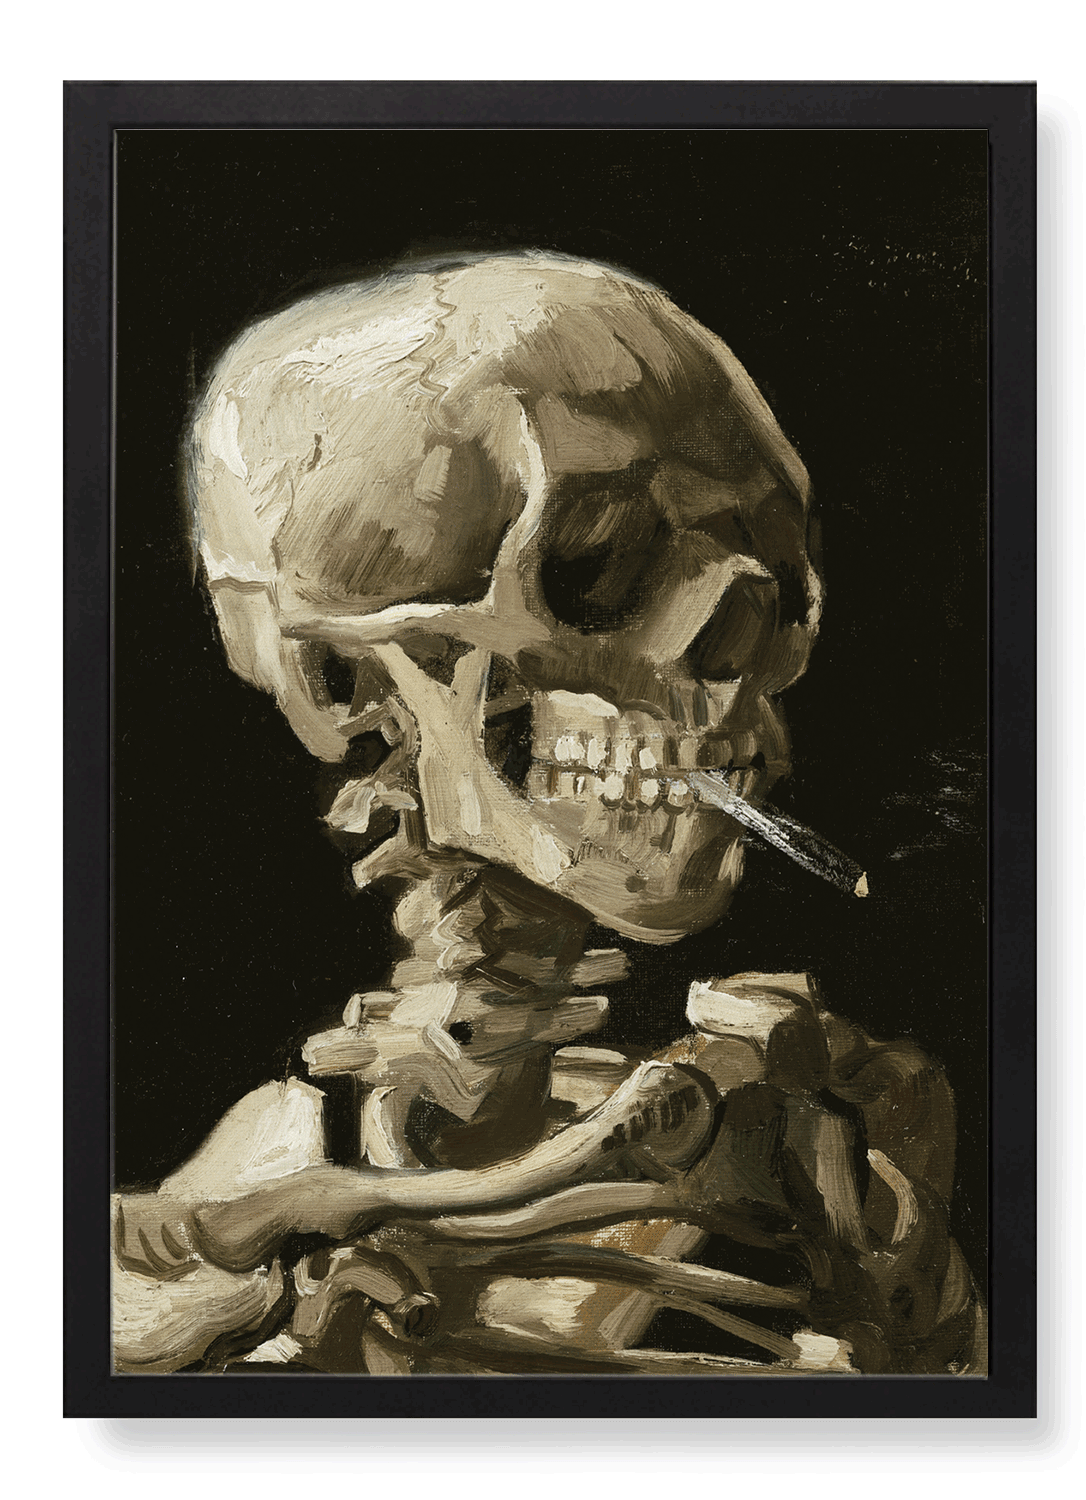 A SKELETON WITH A CIGARETTE BY VAN GOGH